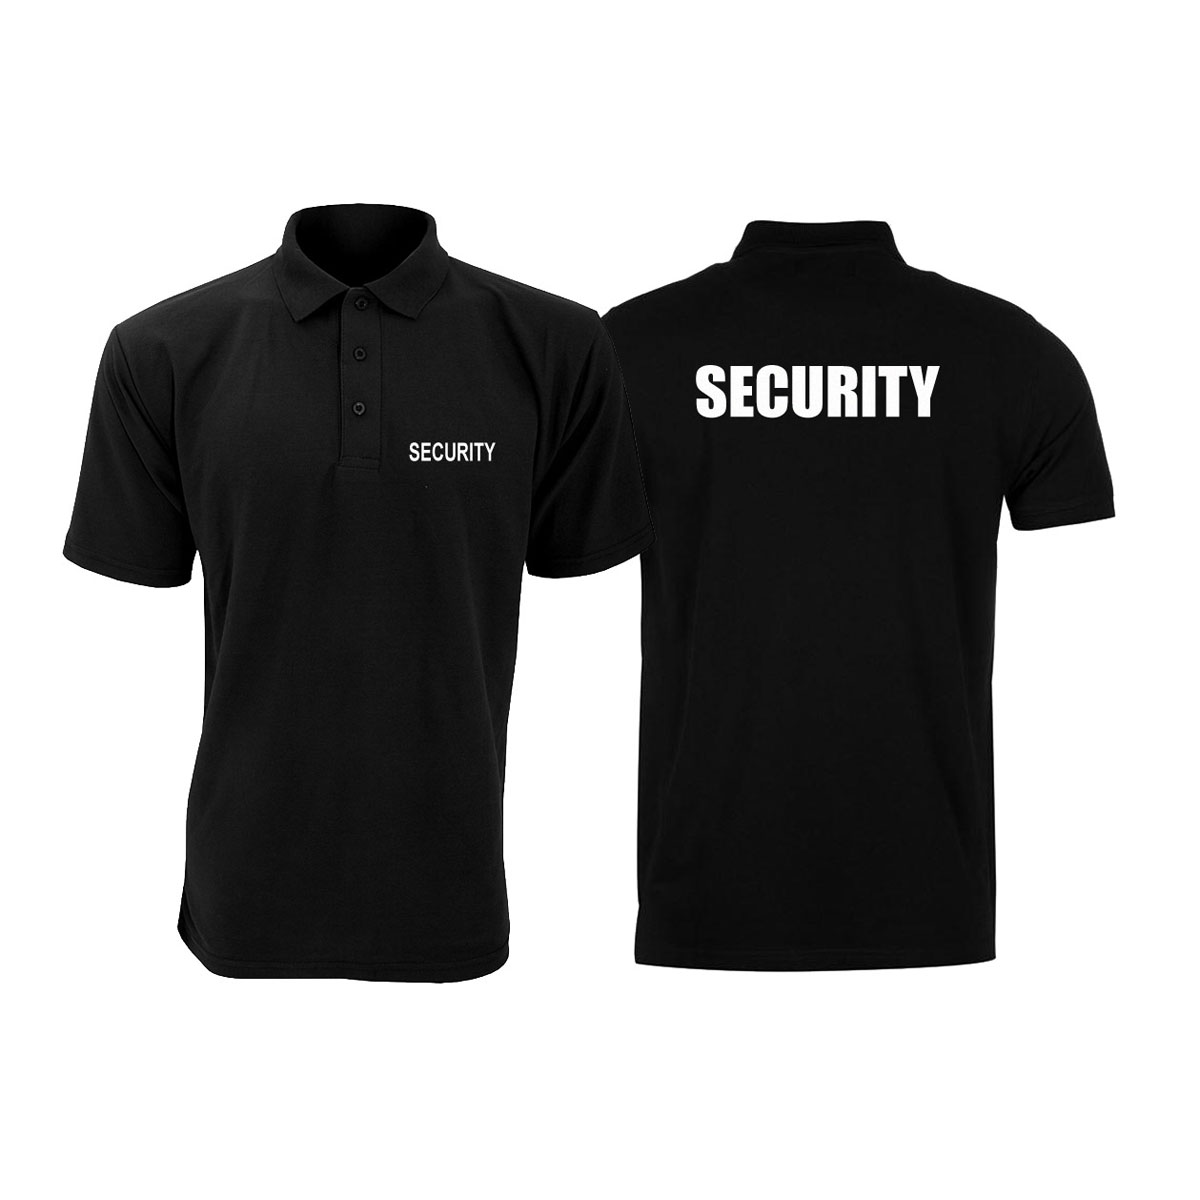 Men's Shirts & Tops Men's Clothing Security Polo Shirt Personalised ...